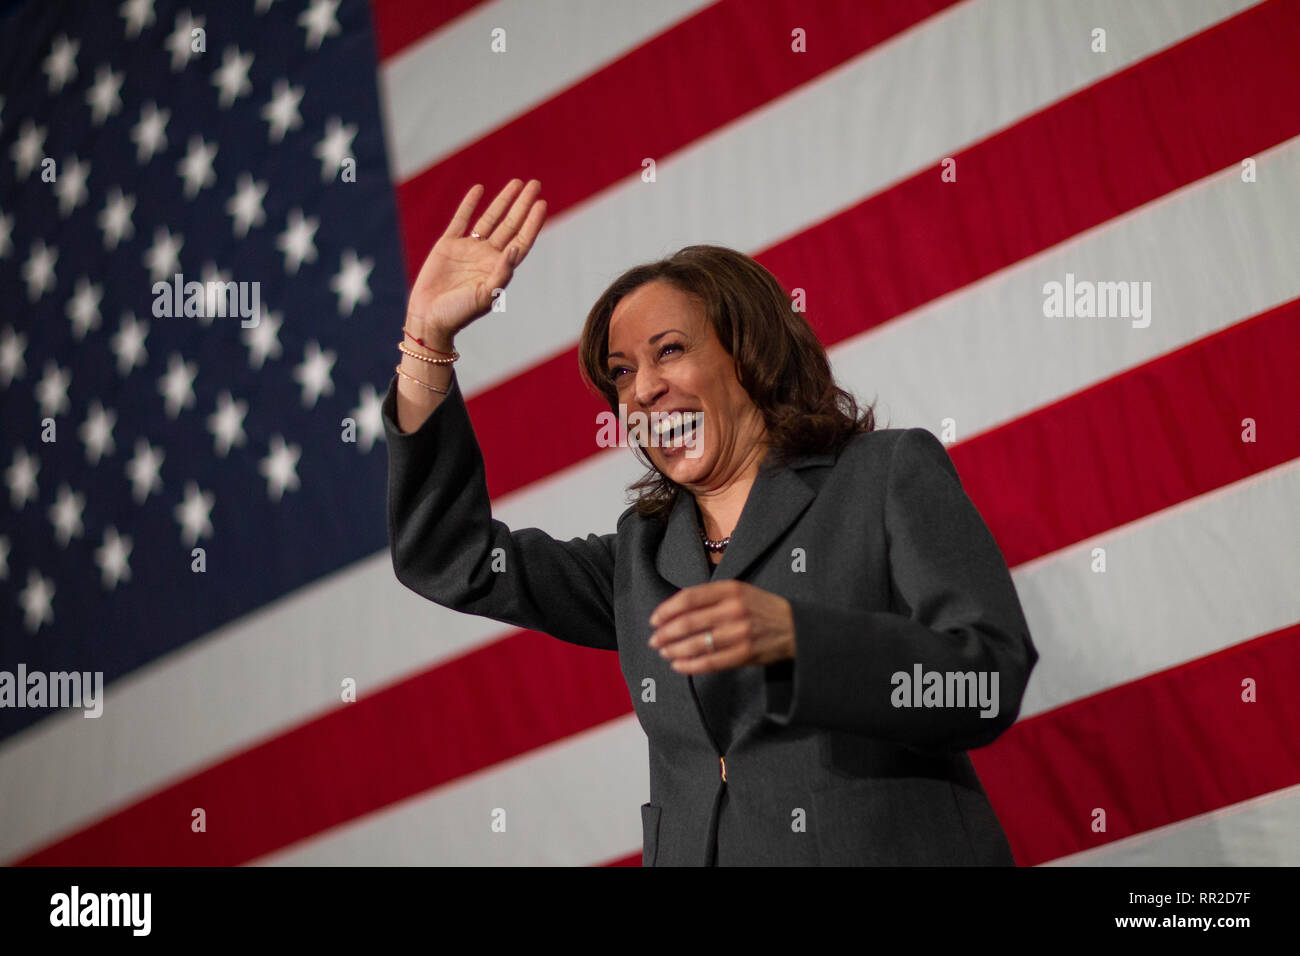 Ankeny, Iowa, USA. 23rd February, 2019. U.S. Senator Kamala Harris speaks during a town hall campaign event at the FFA Enrichment Center on the campus of the Des Moines Area Community College (DMACC) in Ankeny, Iowa, USA. Sen. Harris, a Democratic presidential candidate for the 2020 election, is campaigning in Iowa ahead of the state's first-in-the-nation caucuses. J. Alex Cooney/Alamy Live News Stock Photo